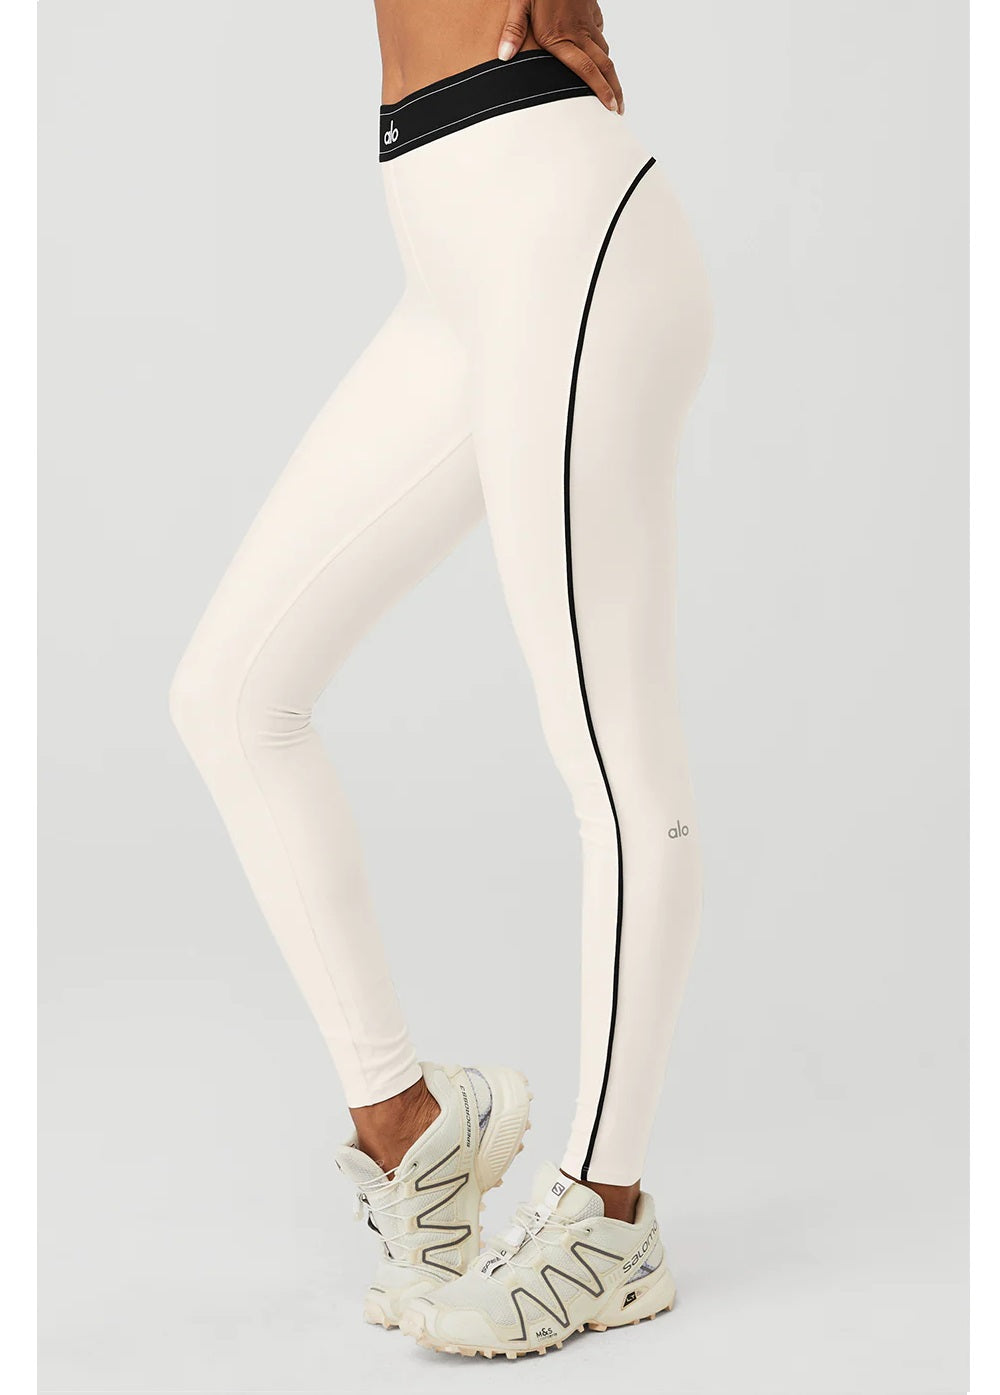 Leggins with high stairwelling women's sports for yoga